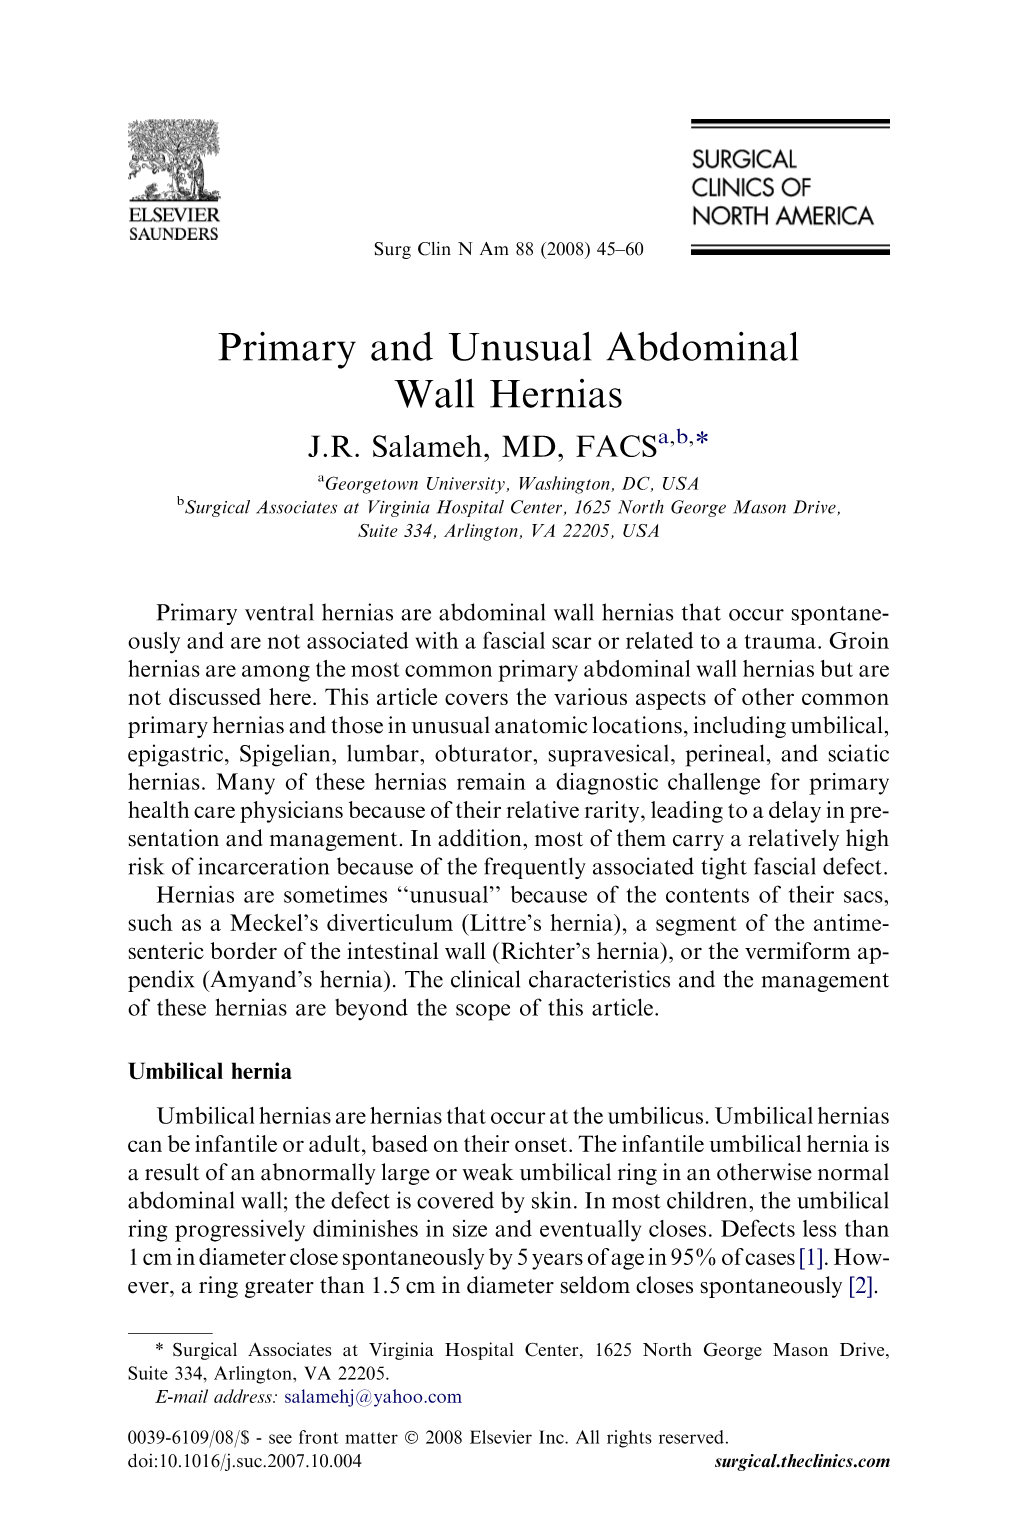 Primary and Unusual Abdominal Wall Hernias J.R